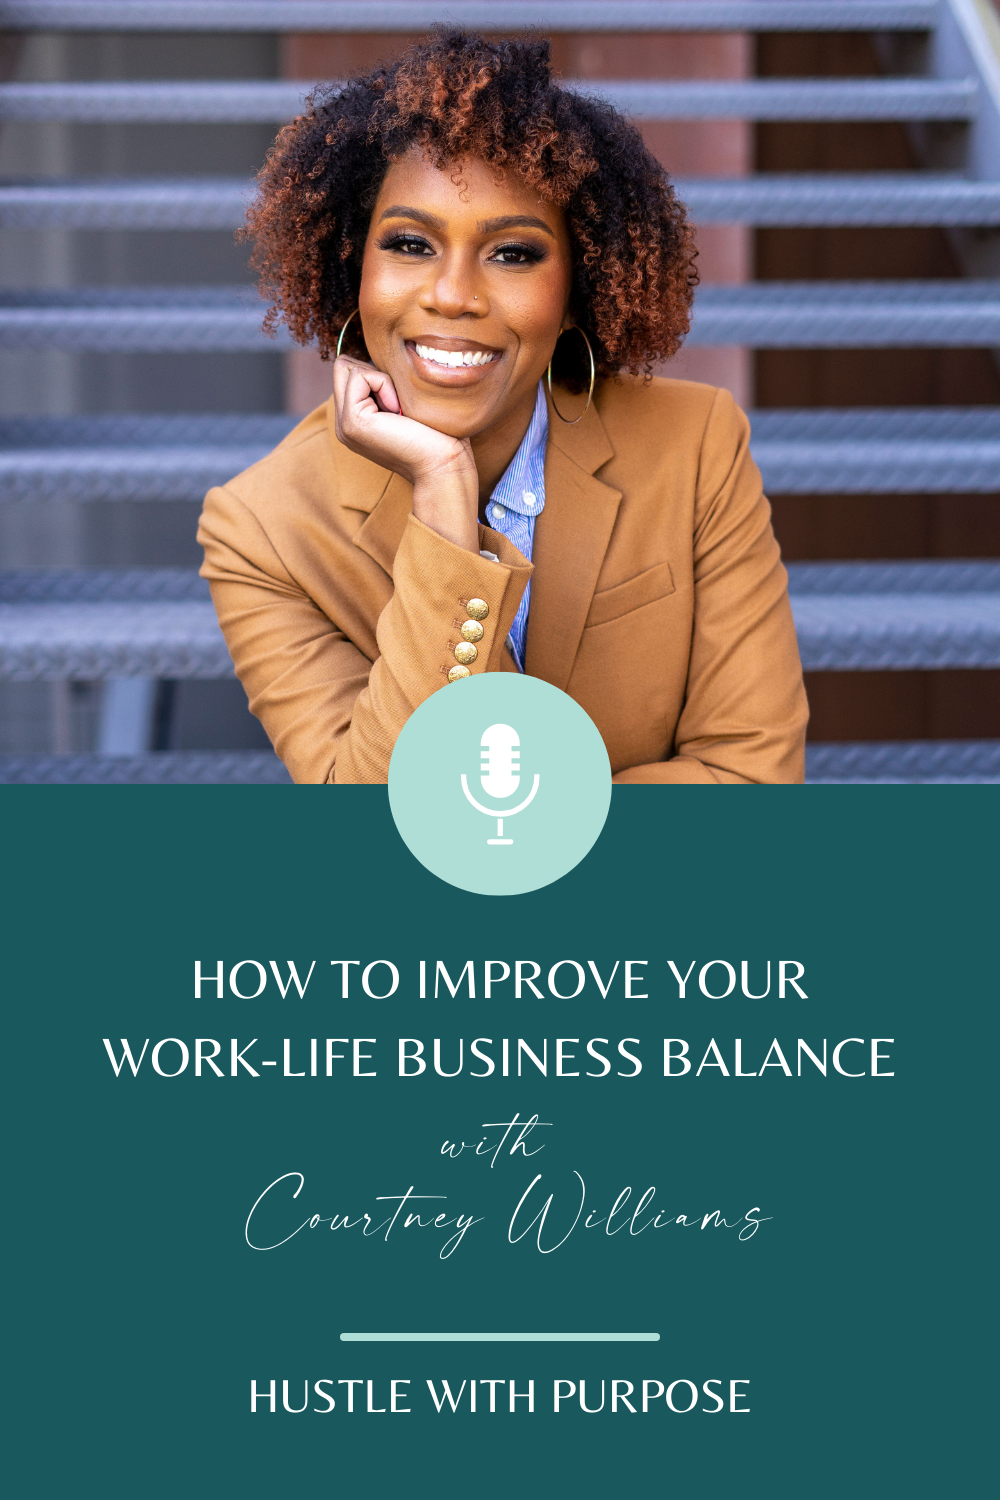 How to Improve Your Work Life Business Balance with Courtney Williams 1